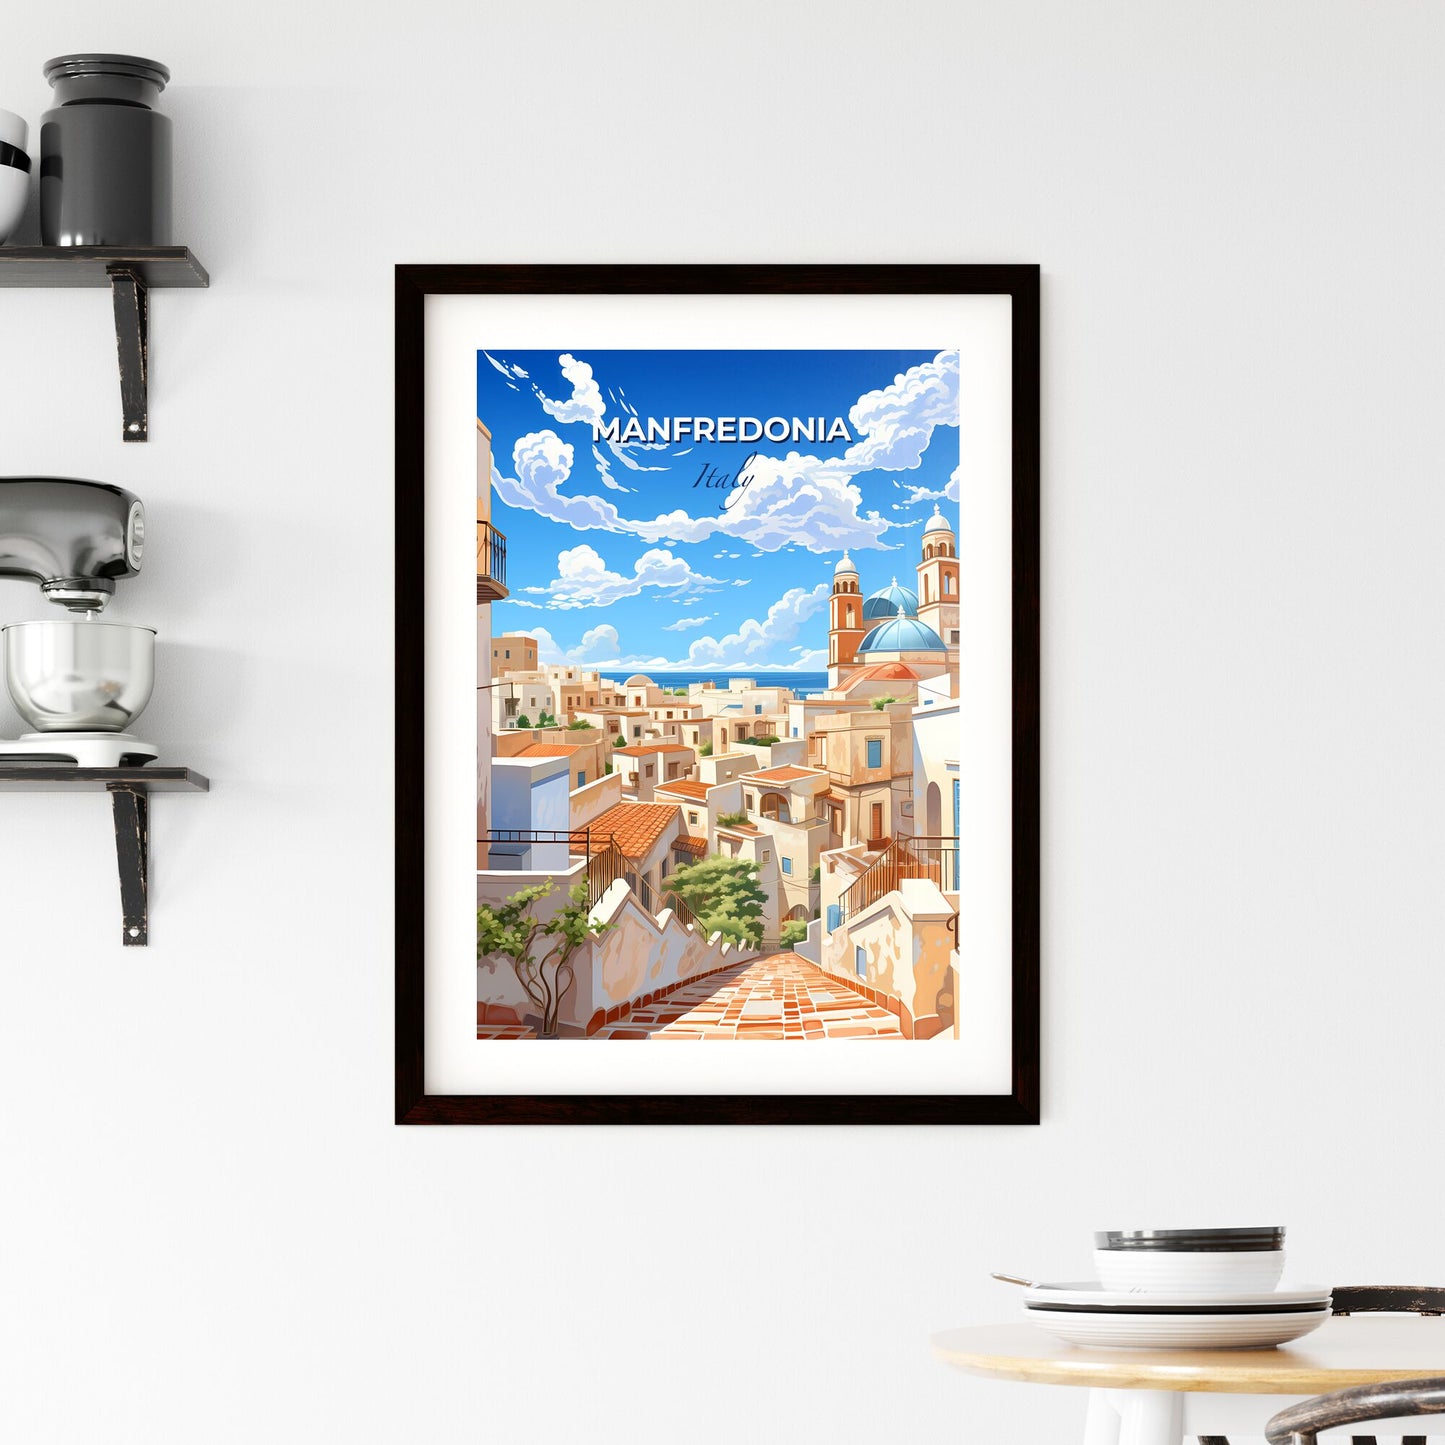 Manfredonia, Italy, A Poster of a city with a blue sky and clouds Default Title